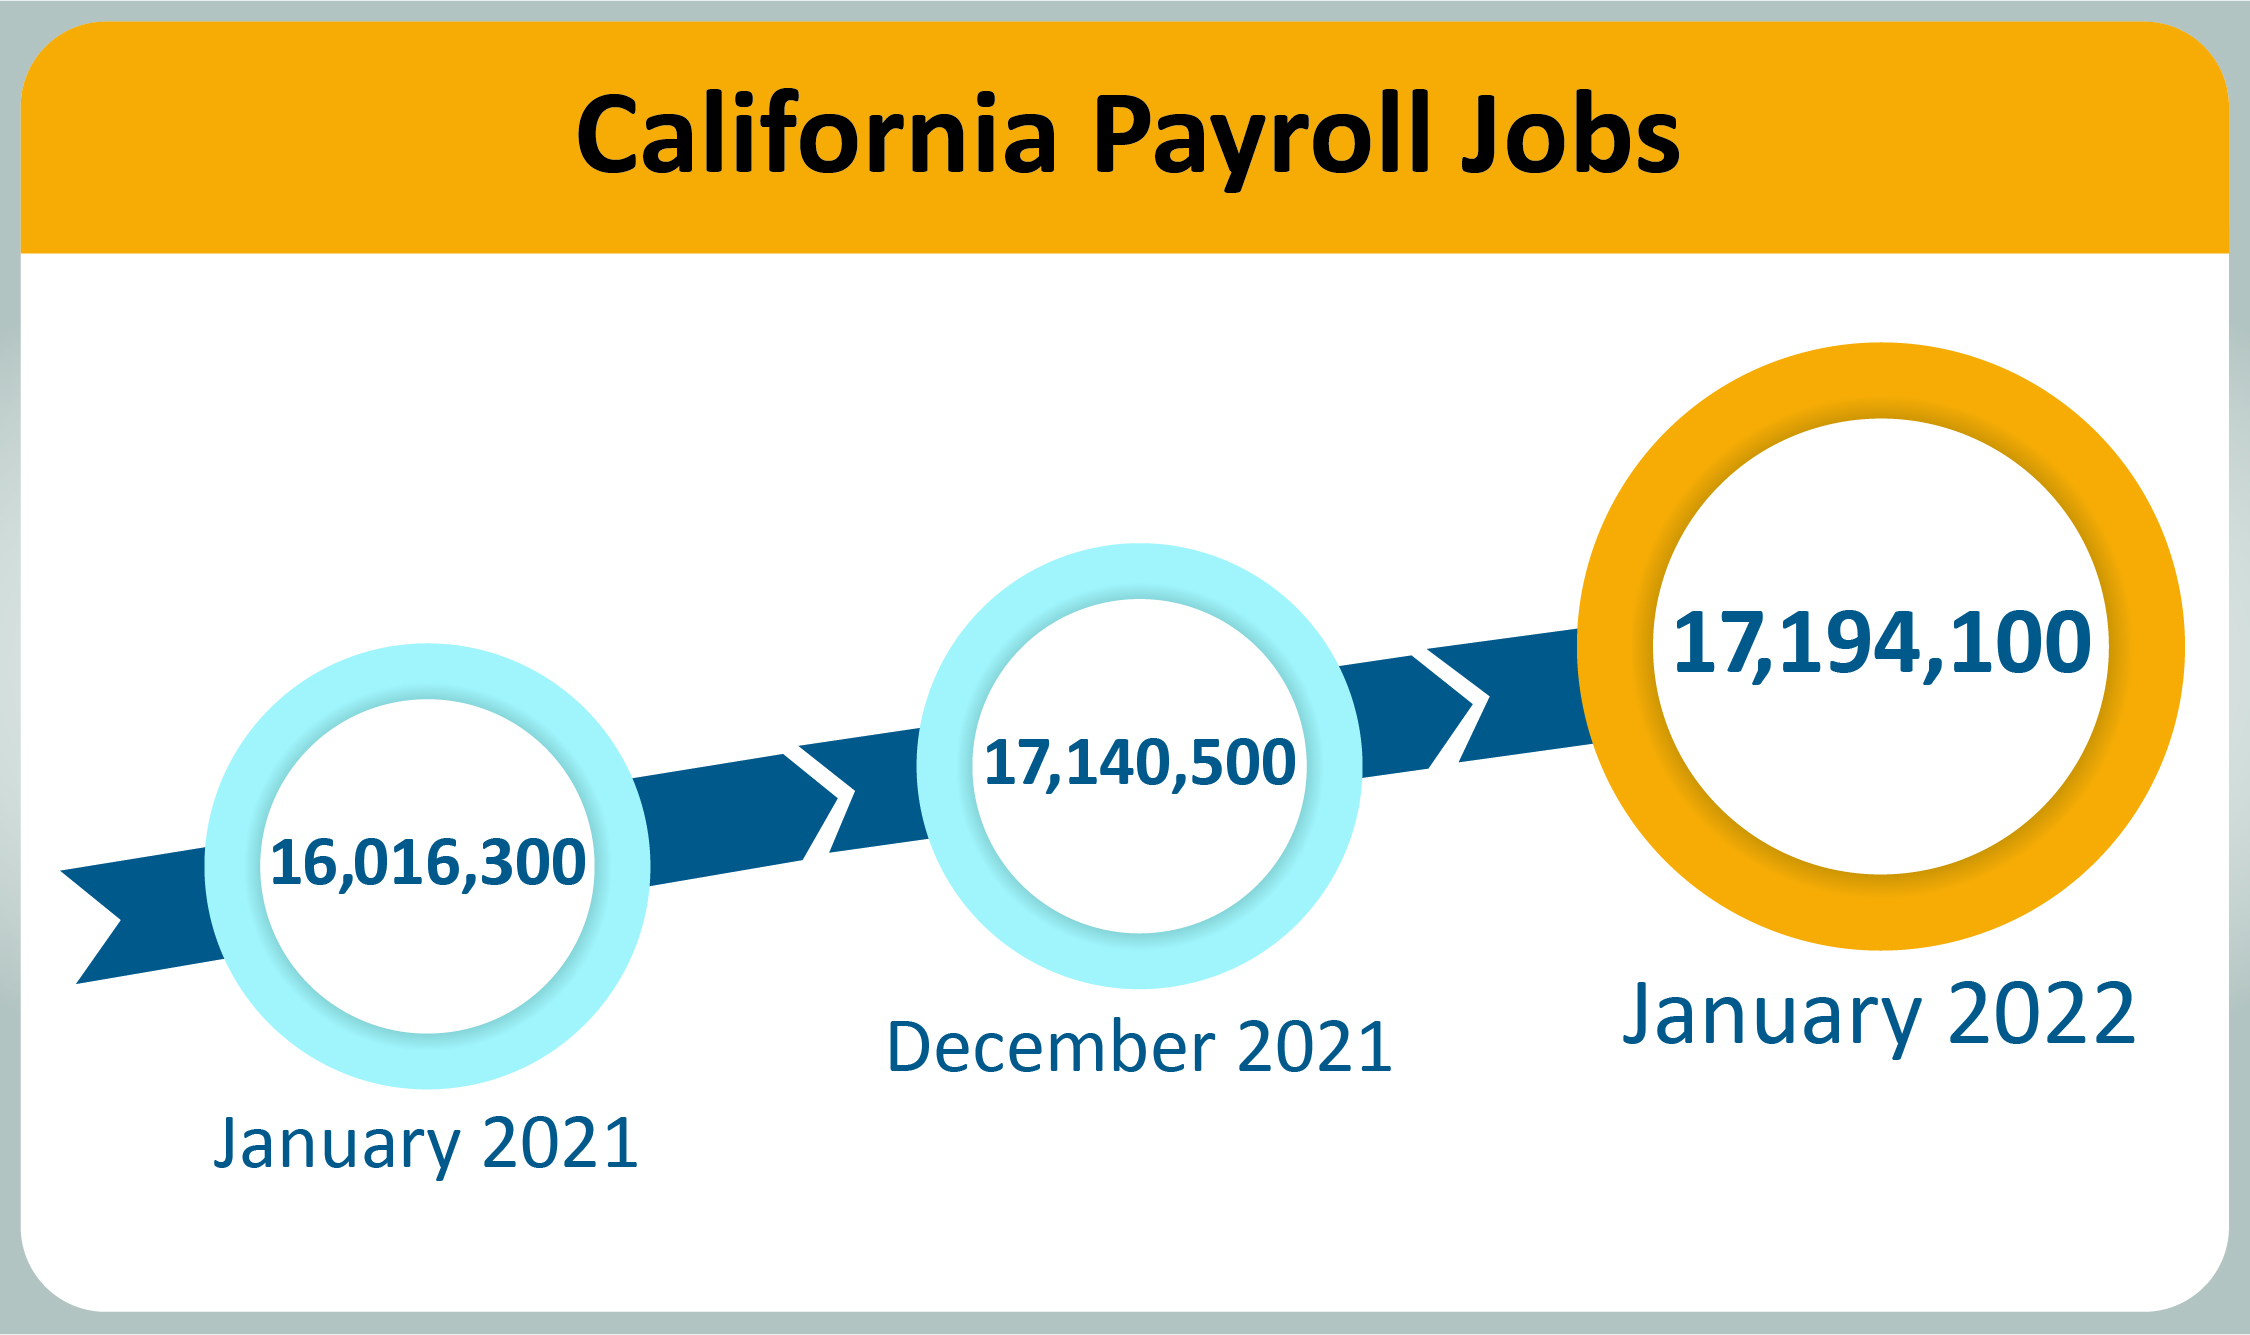 California payroll jobs totaled 17,194,100 in January 2022.